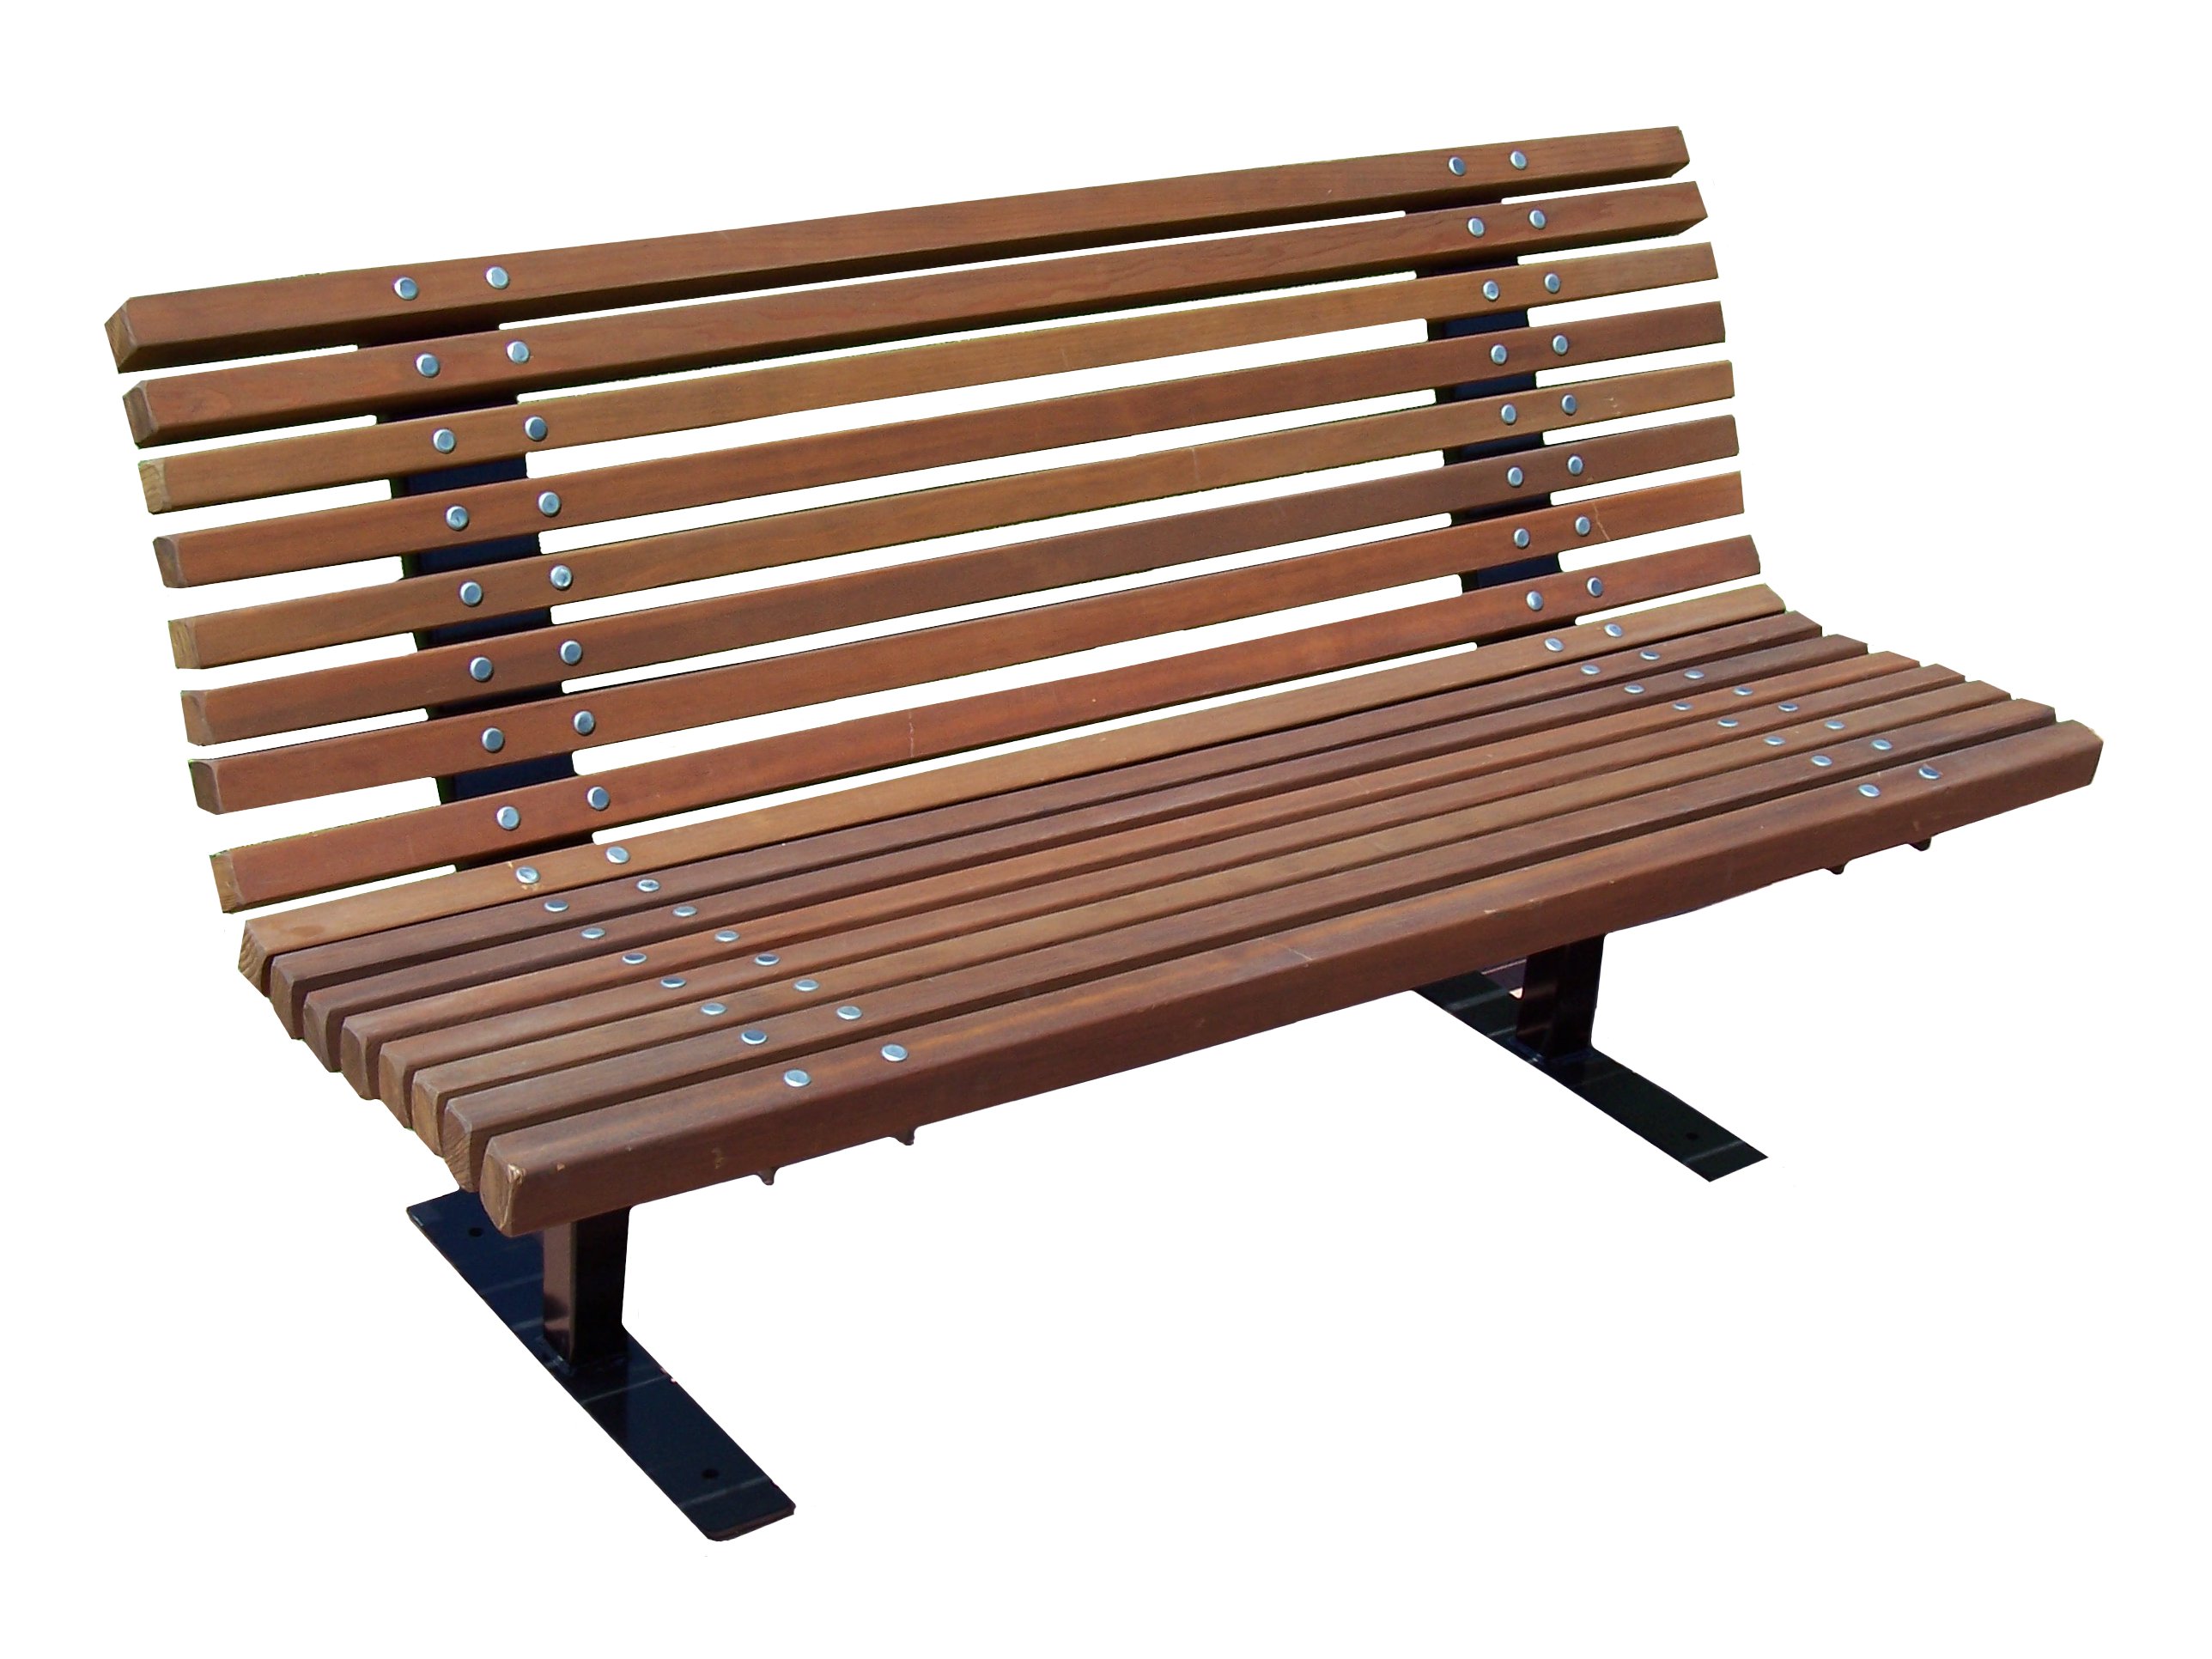 Wooden Benches Wooden Park Benches Outdoor Wooden Benches